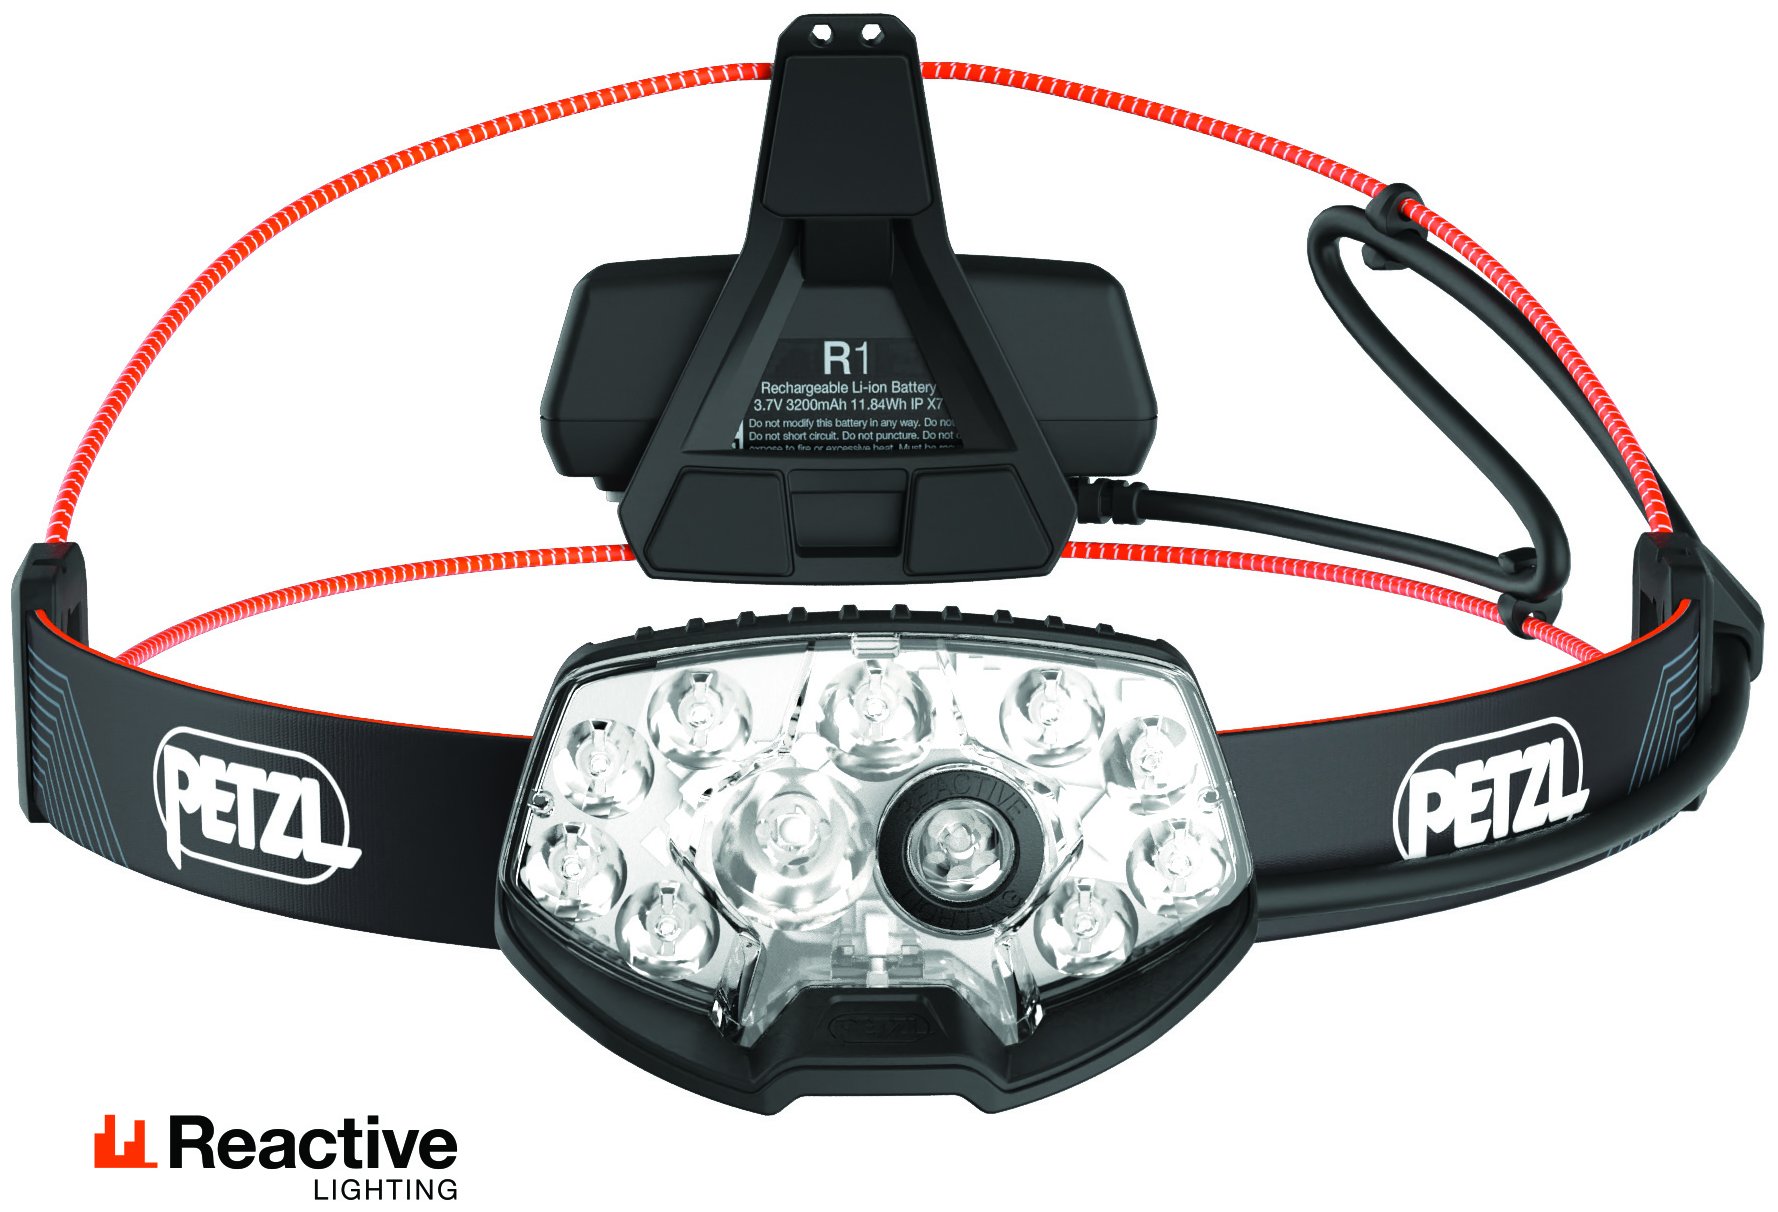 Petzl - R1 Rechargeable Battery for the Nao RL headlamp - Karst Sports